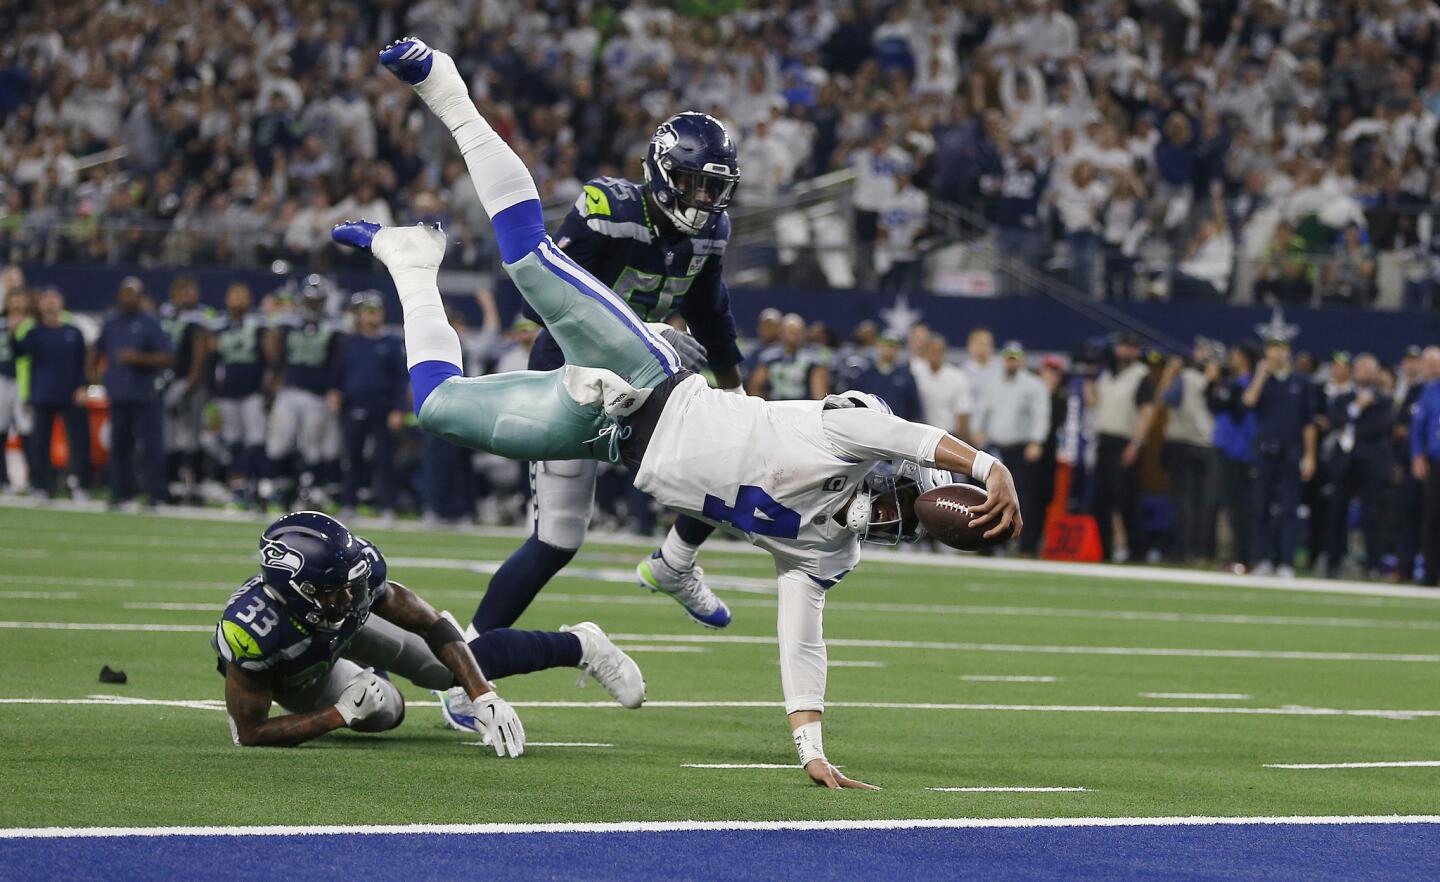 Dallas Cowboys quarterback Dak Prescott (4) flies for the goal line and makes a first down against Seattle Seahawks defensive end Frank Clark (55) during the second half of the NFC wild-card NFL football game in Arlington, Texas, Saturday, Jan. 5, 2019. (AP Photo/Ron Jenkins)